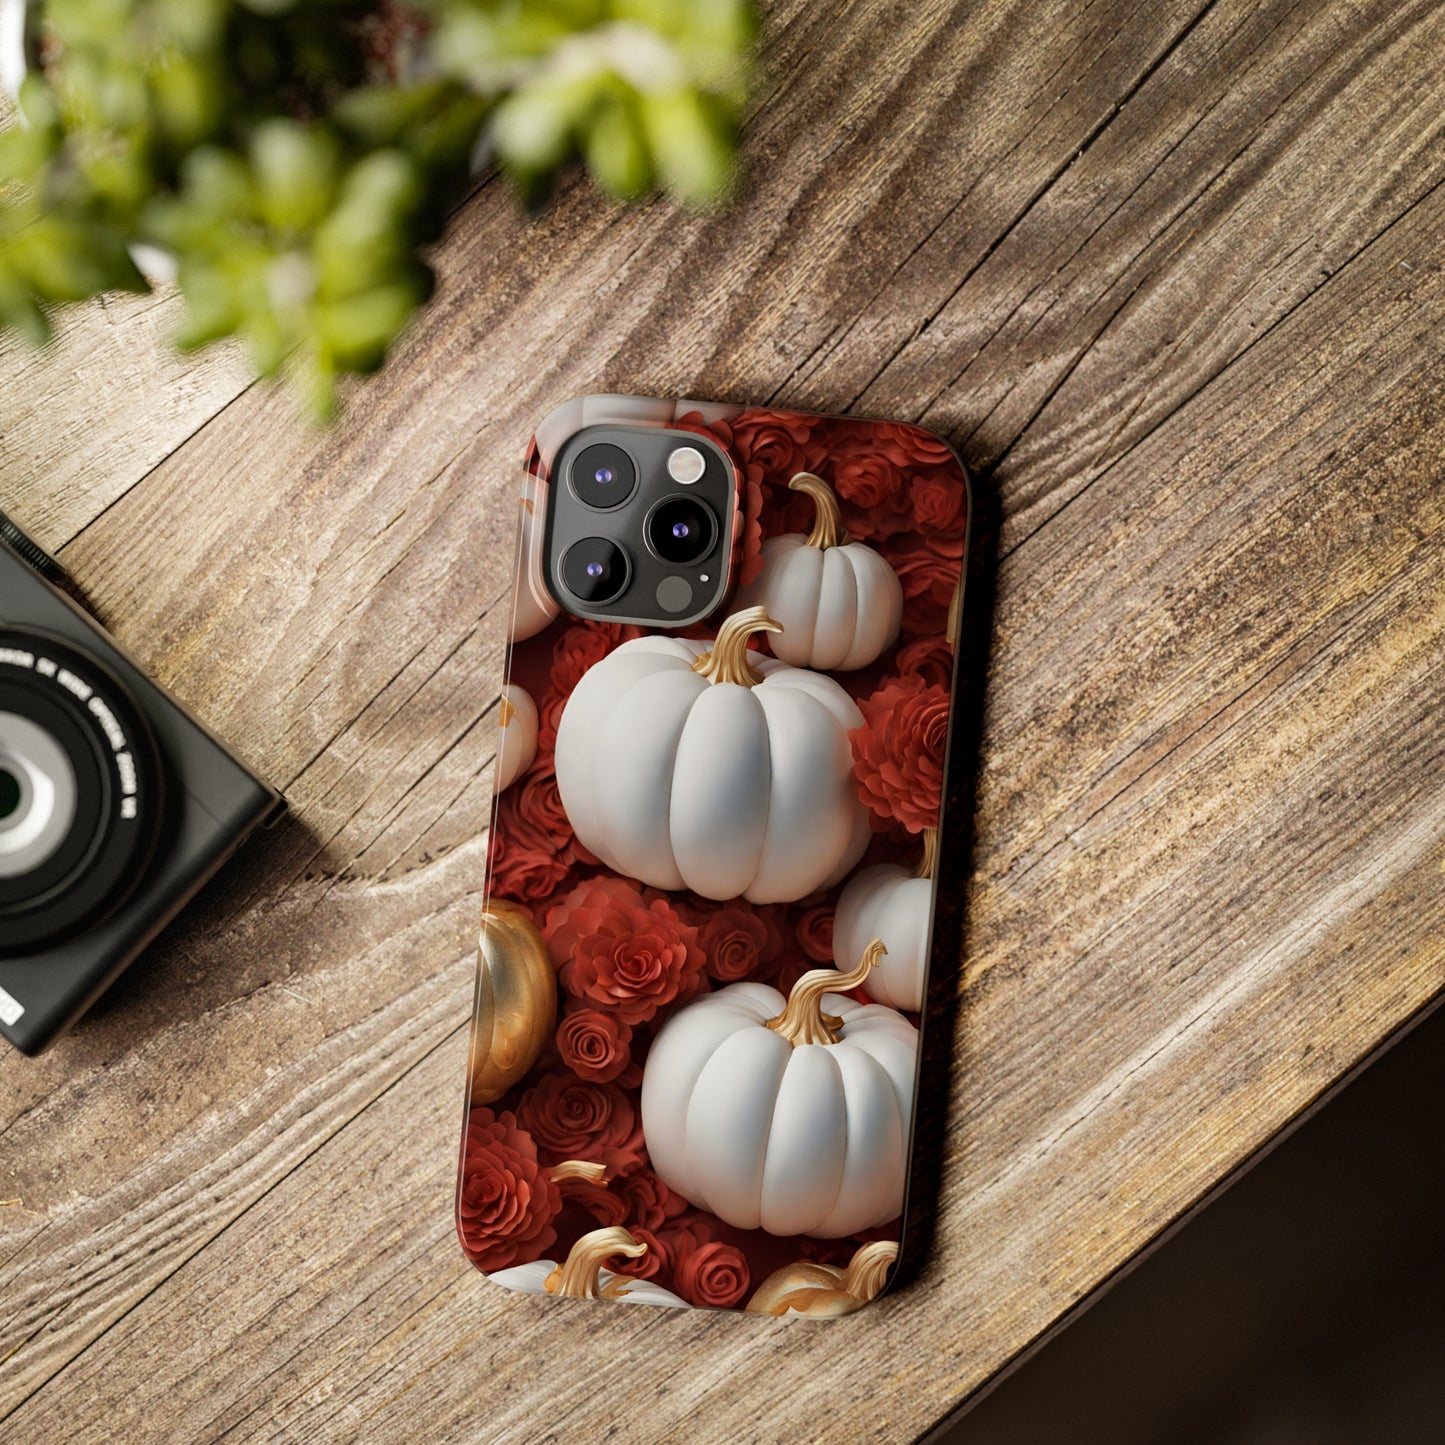 3D White Pumpkins with Marigolds Slim Phone Cases